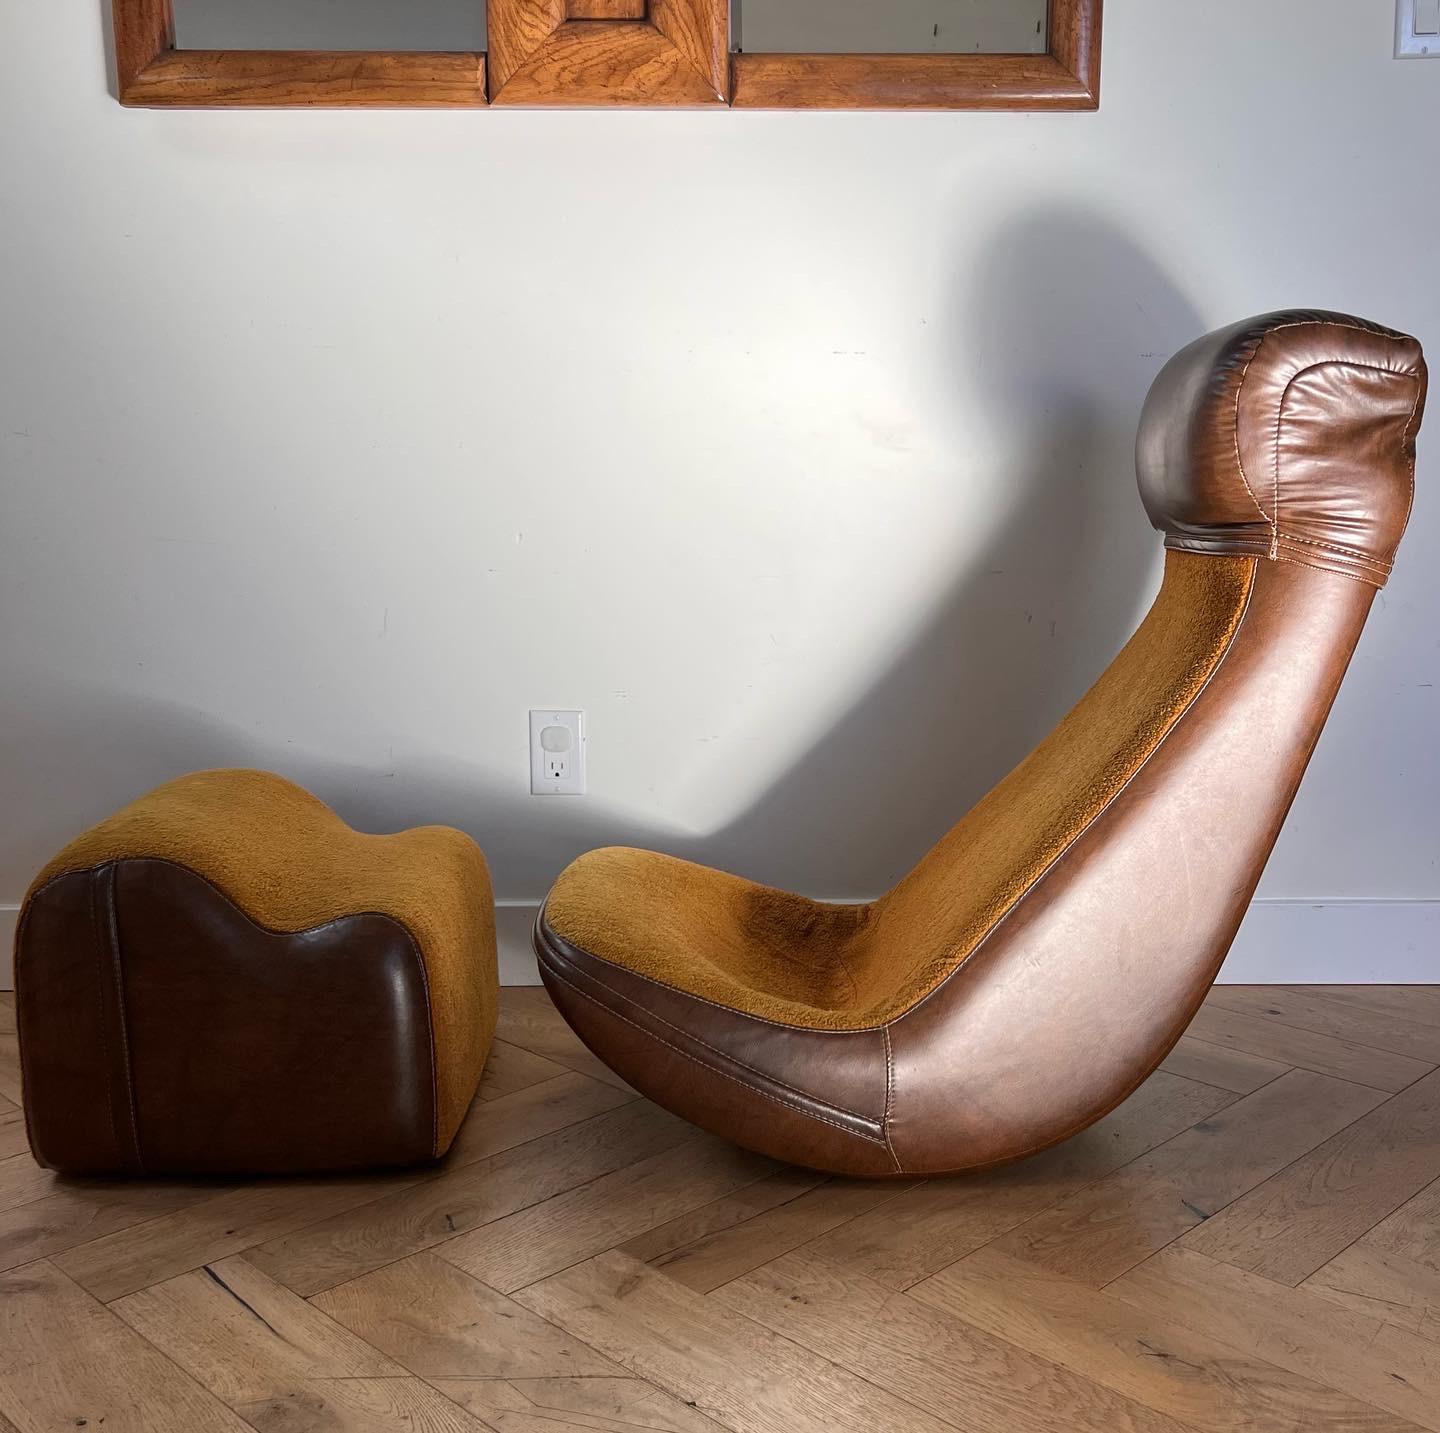 Unknown Groovy Bionic Vibrating Chair with Ottoman, 1970s